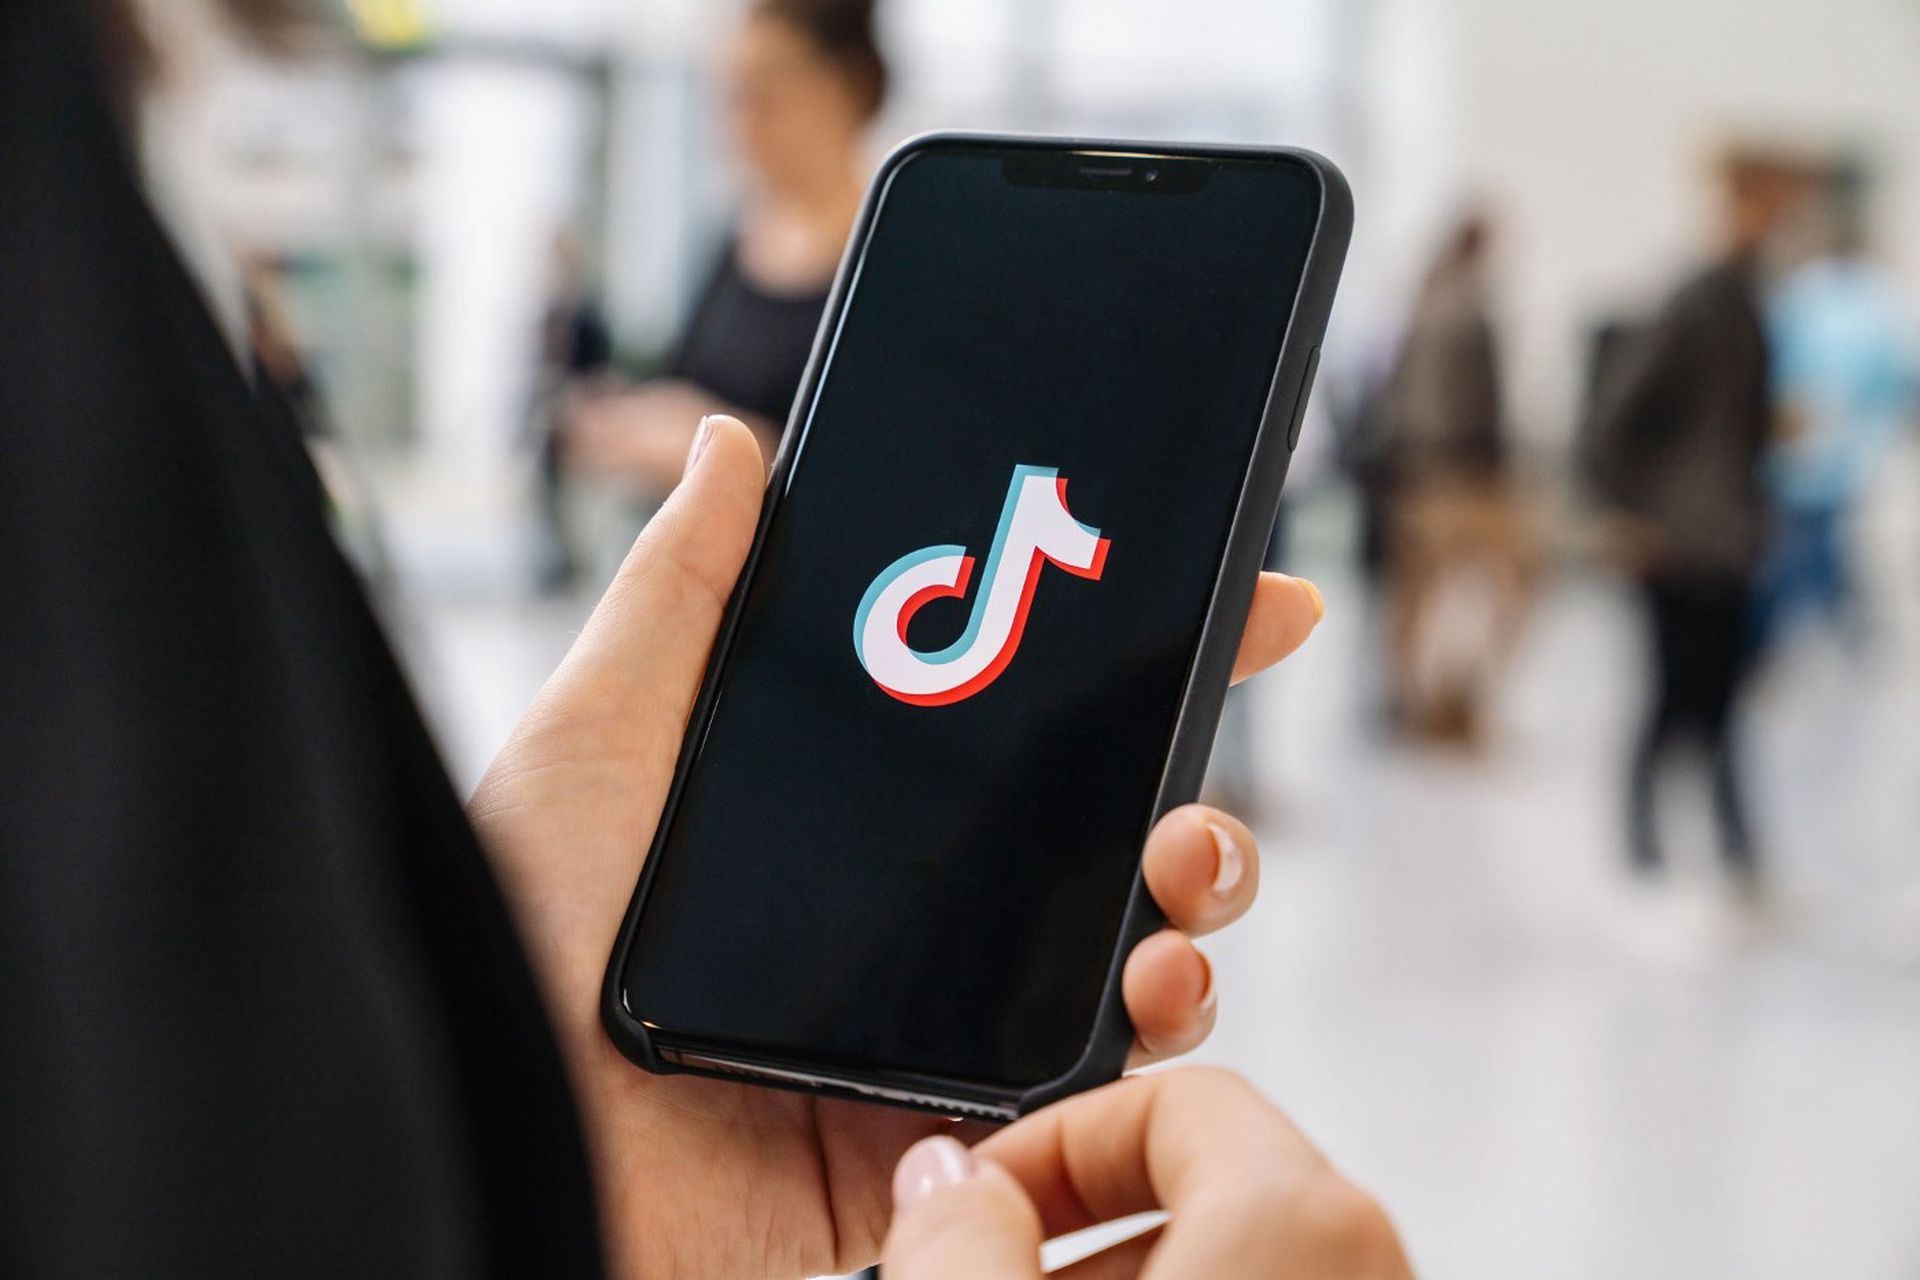 How to reverse a filter on TikTok?